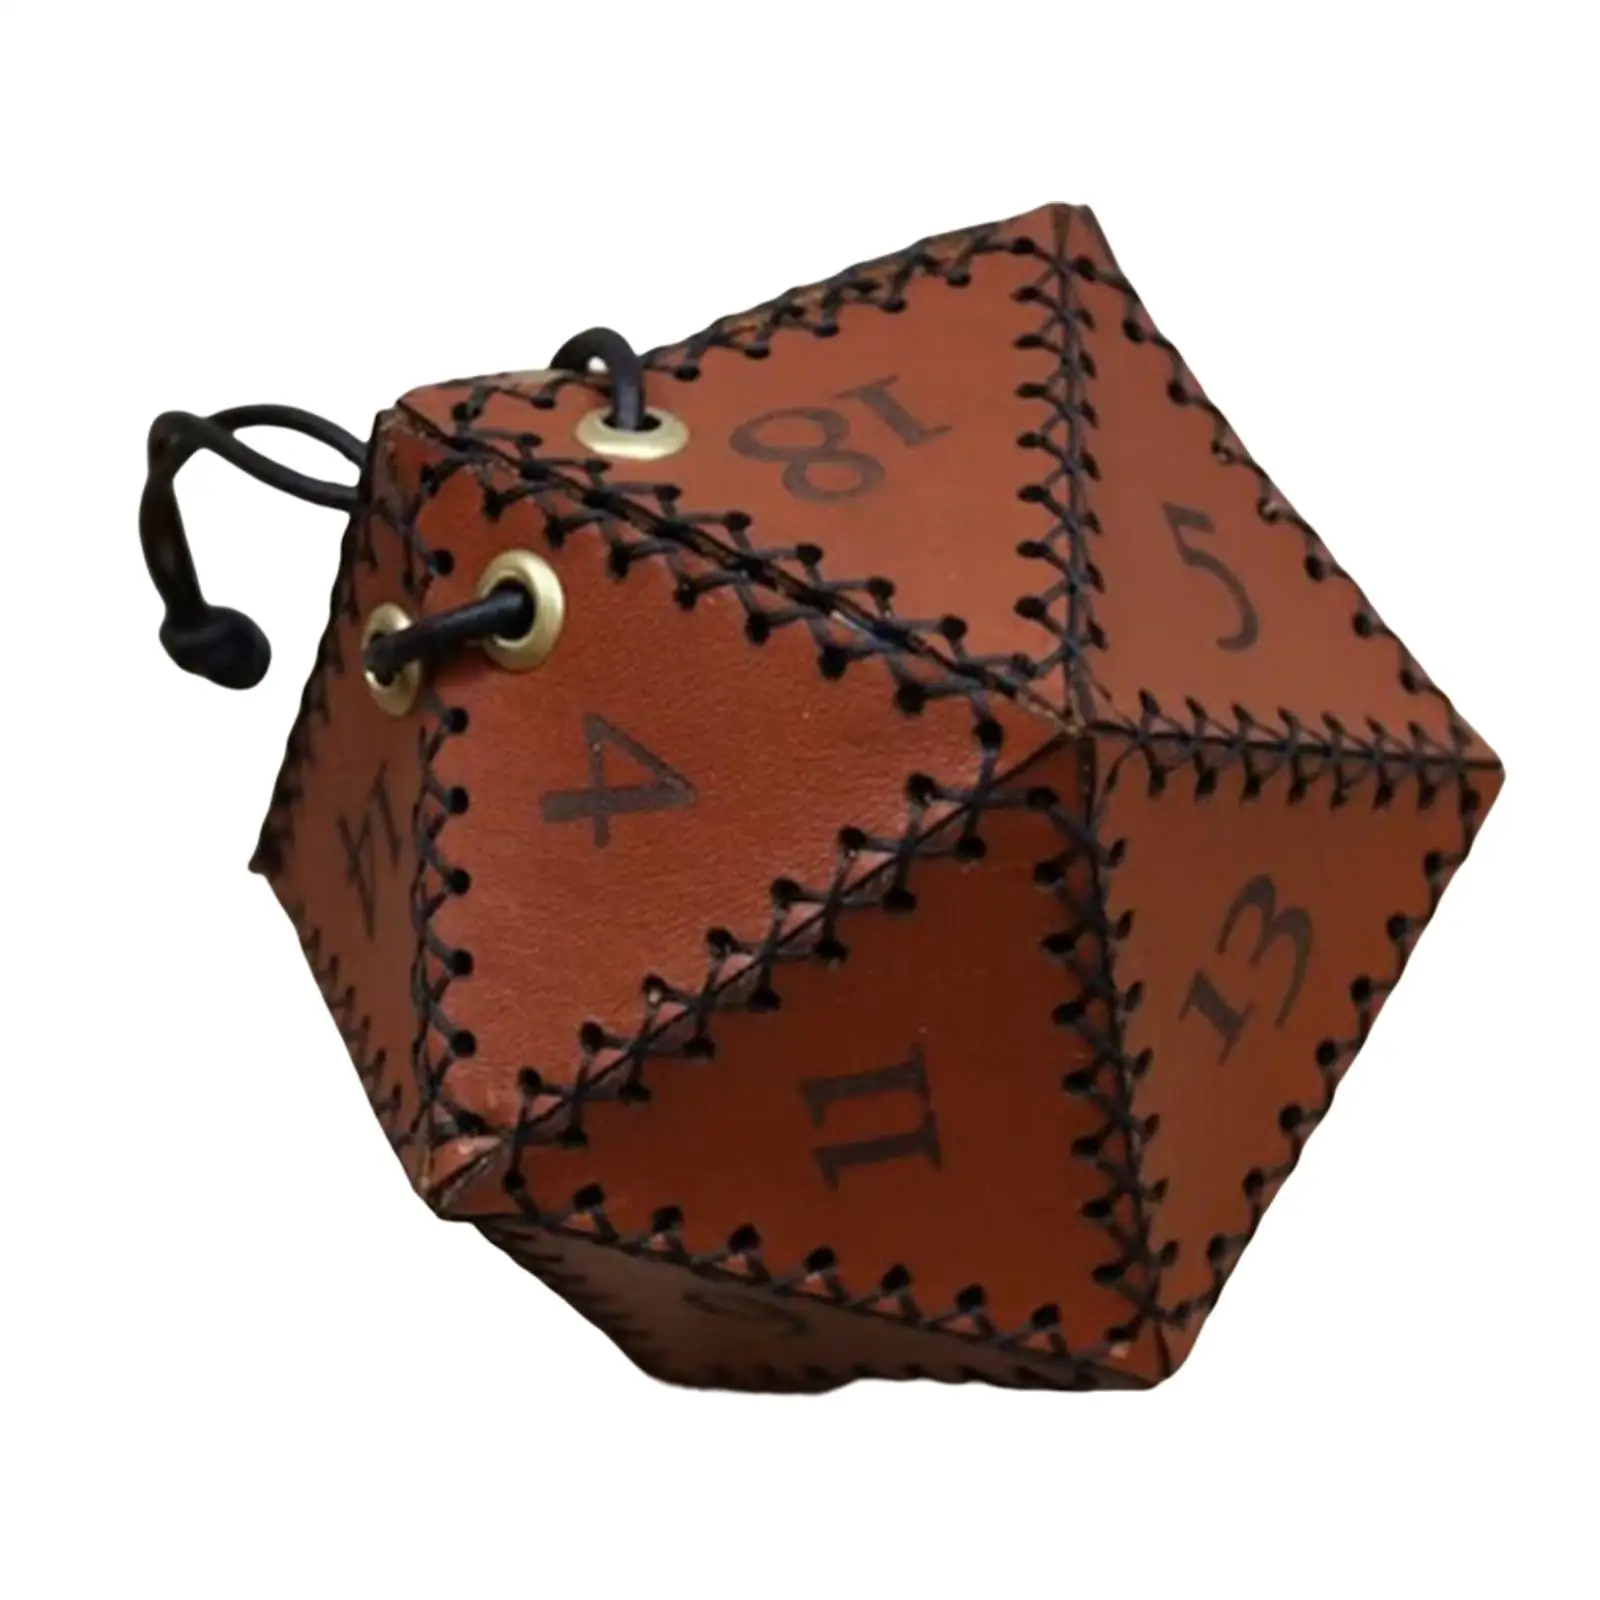 Polyhedral Dices Bag Multipurpose Gifts Storage Bags for Number Games KTV Camping